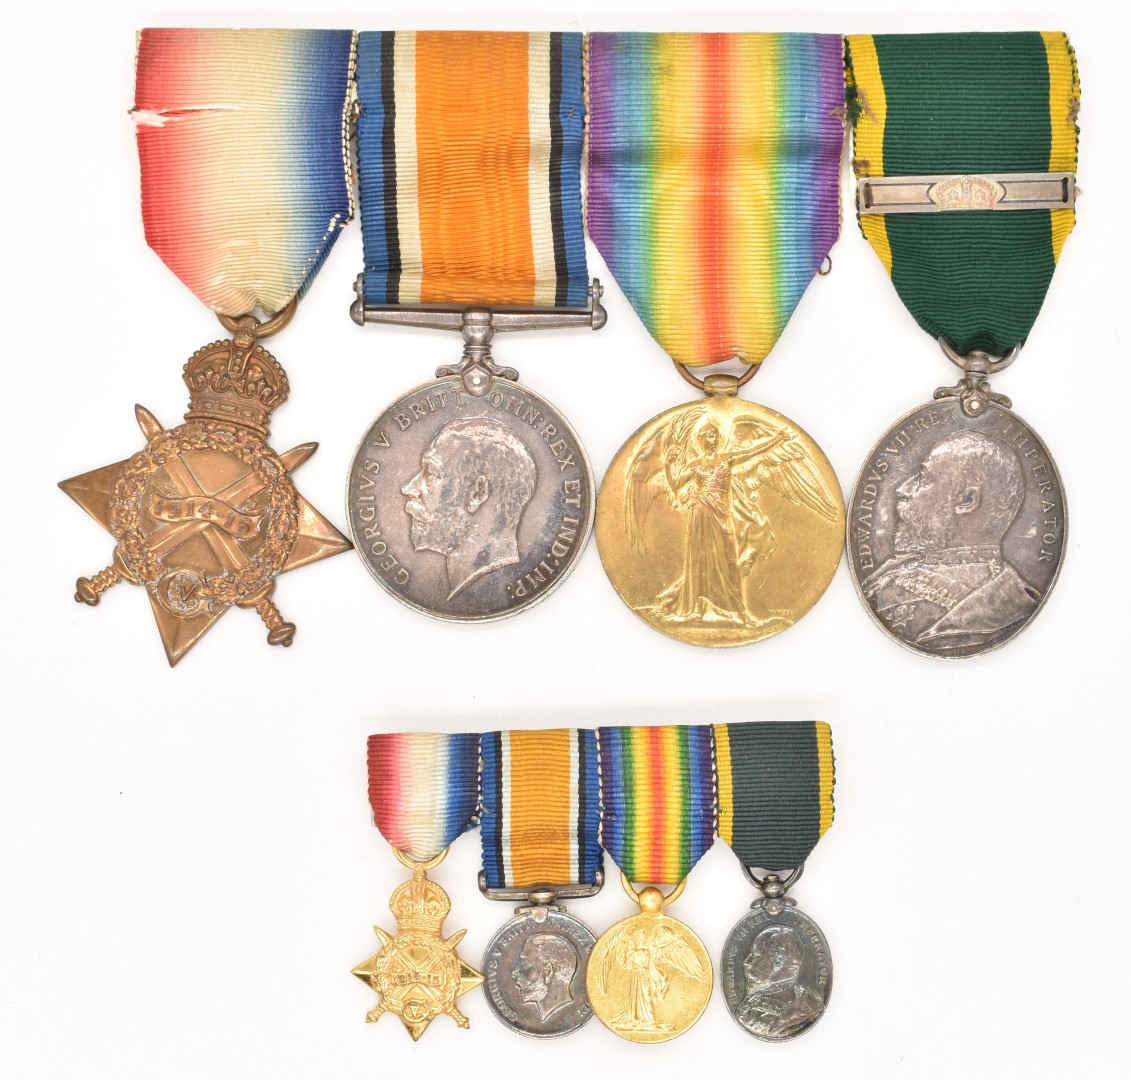 British Army WW1 King's Liverpool Regiment medal group of four comprising 1914/1915 Star, War Medal, - Image 2 of 5